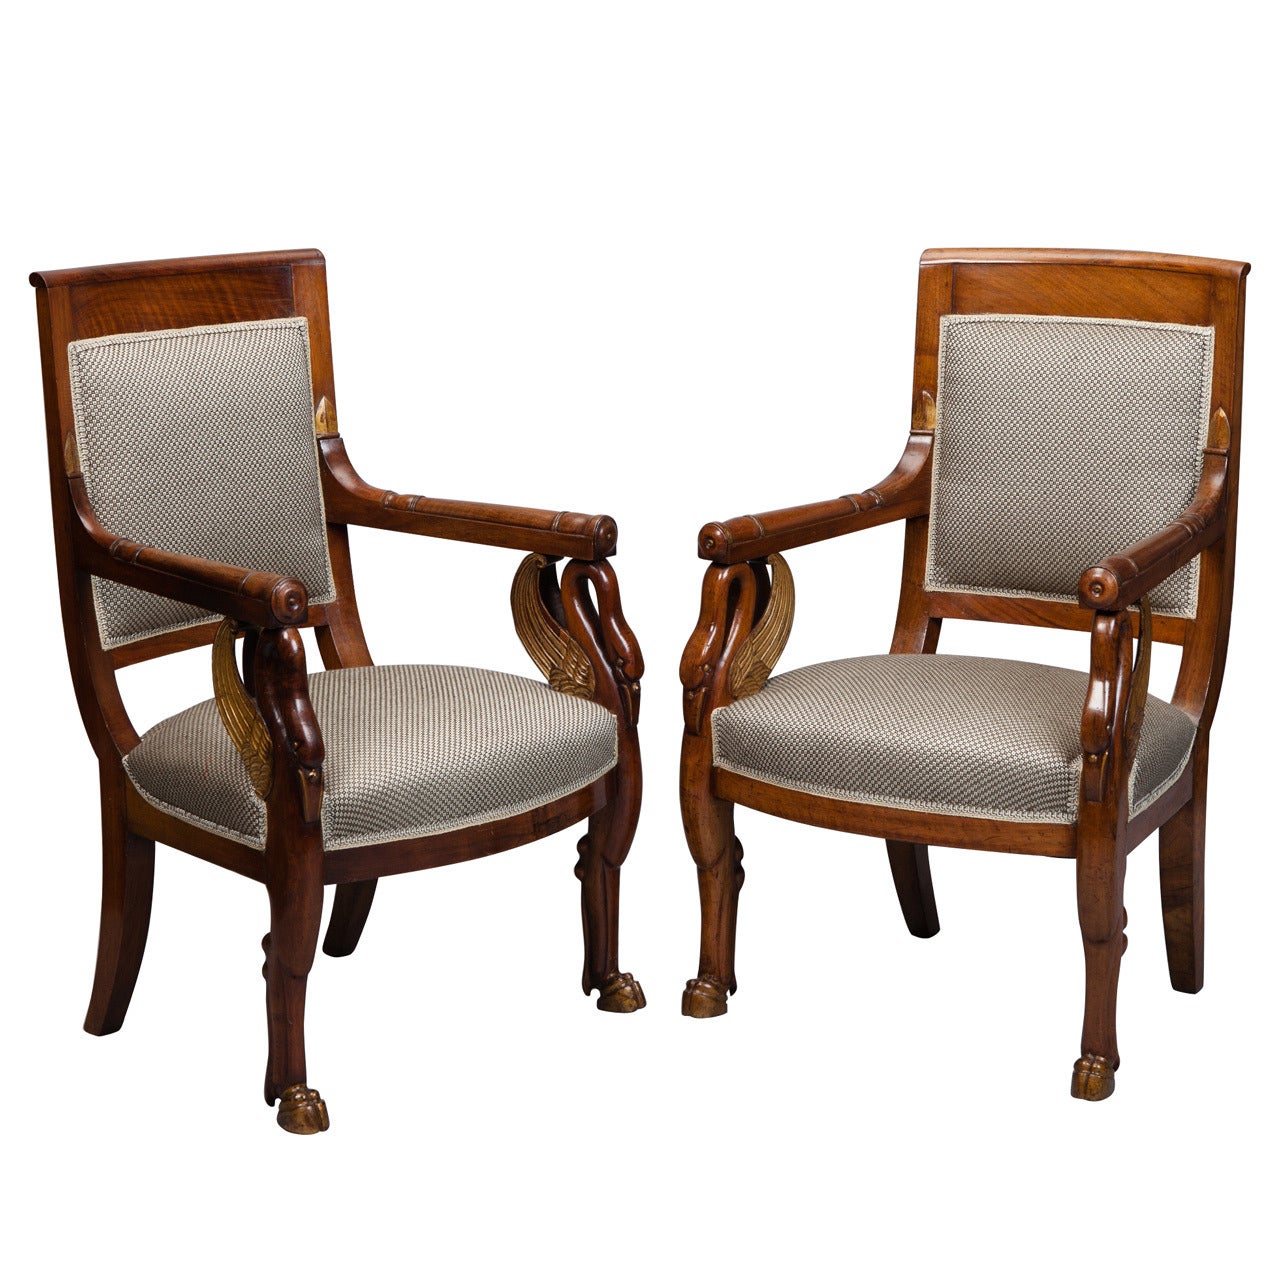 Pair of French Newly Upholstered Mahogany and Parcel-Gilt Chairs